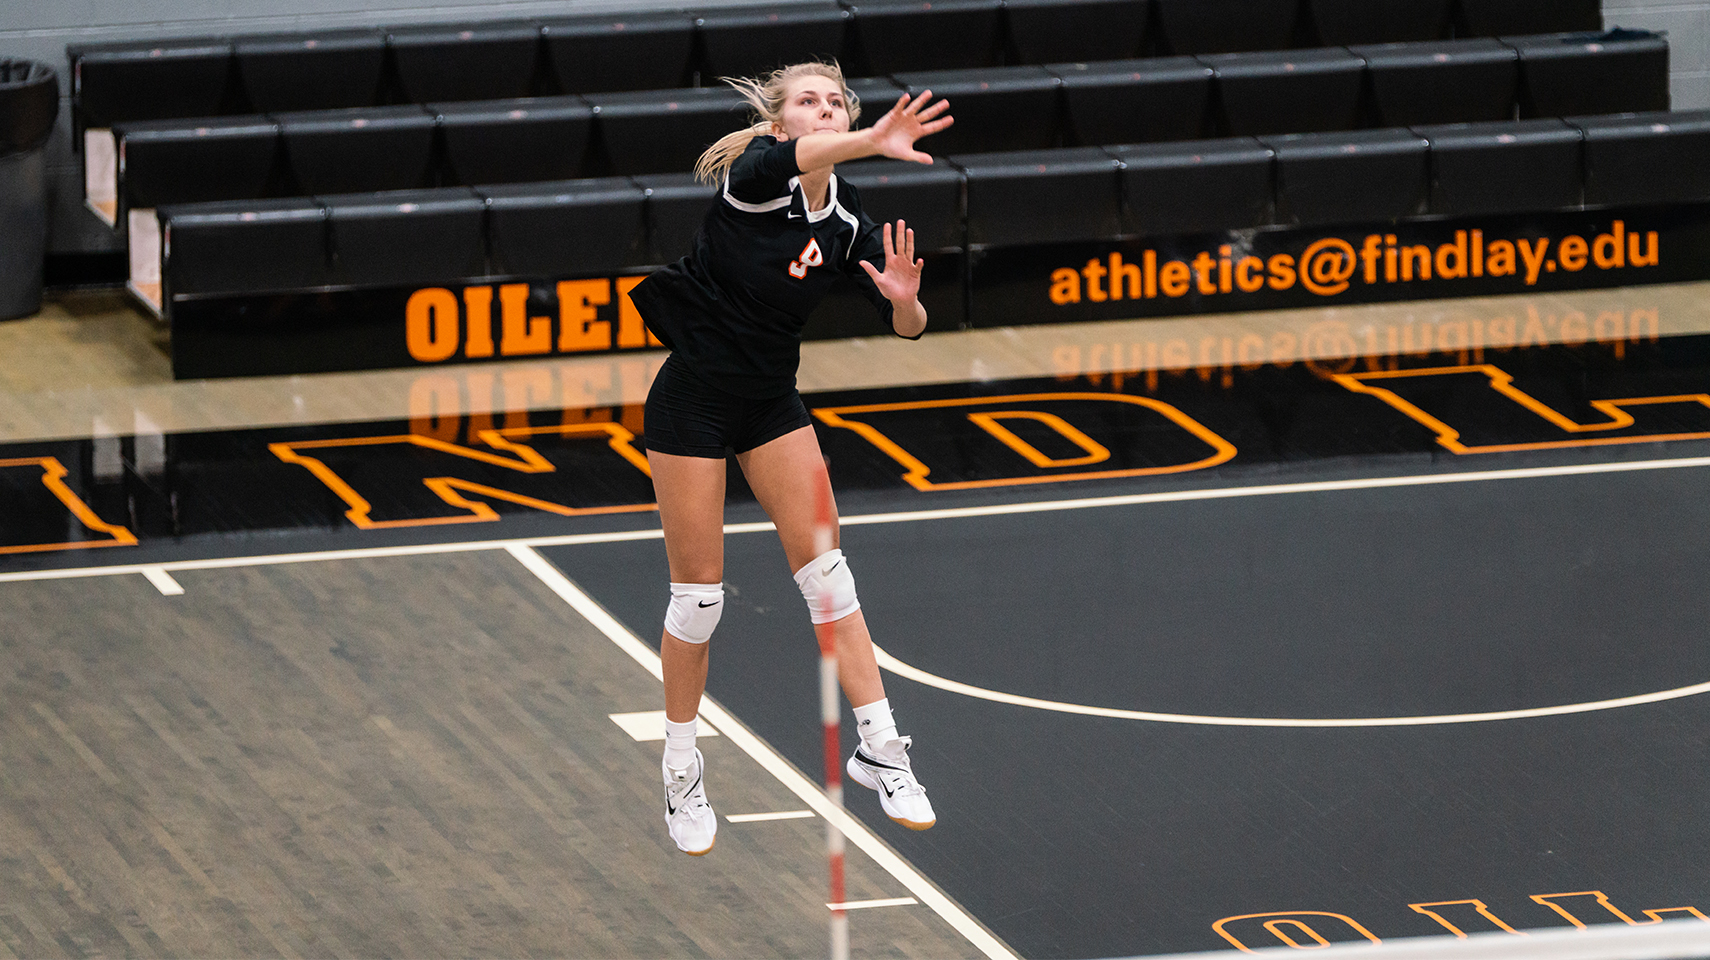 women's volleyball player in black jumping while serving